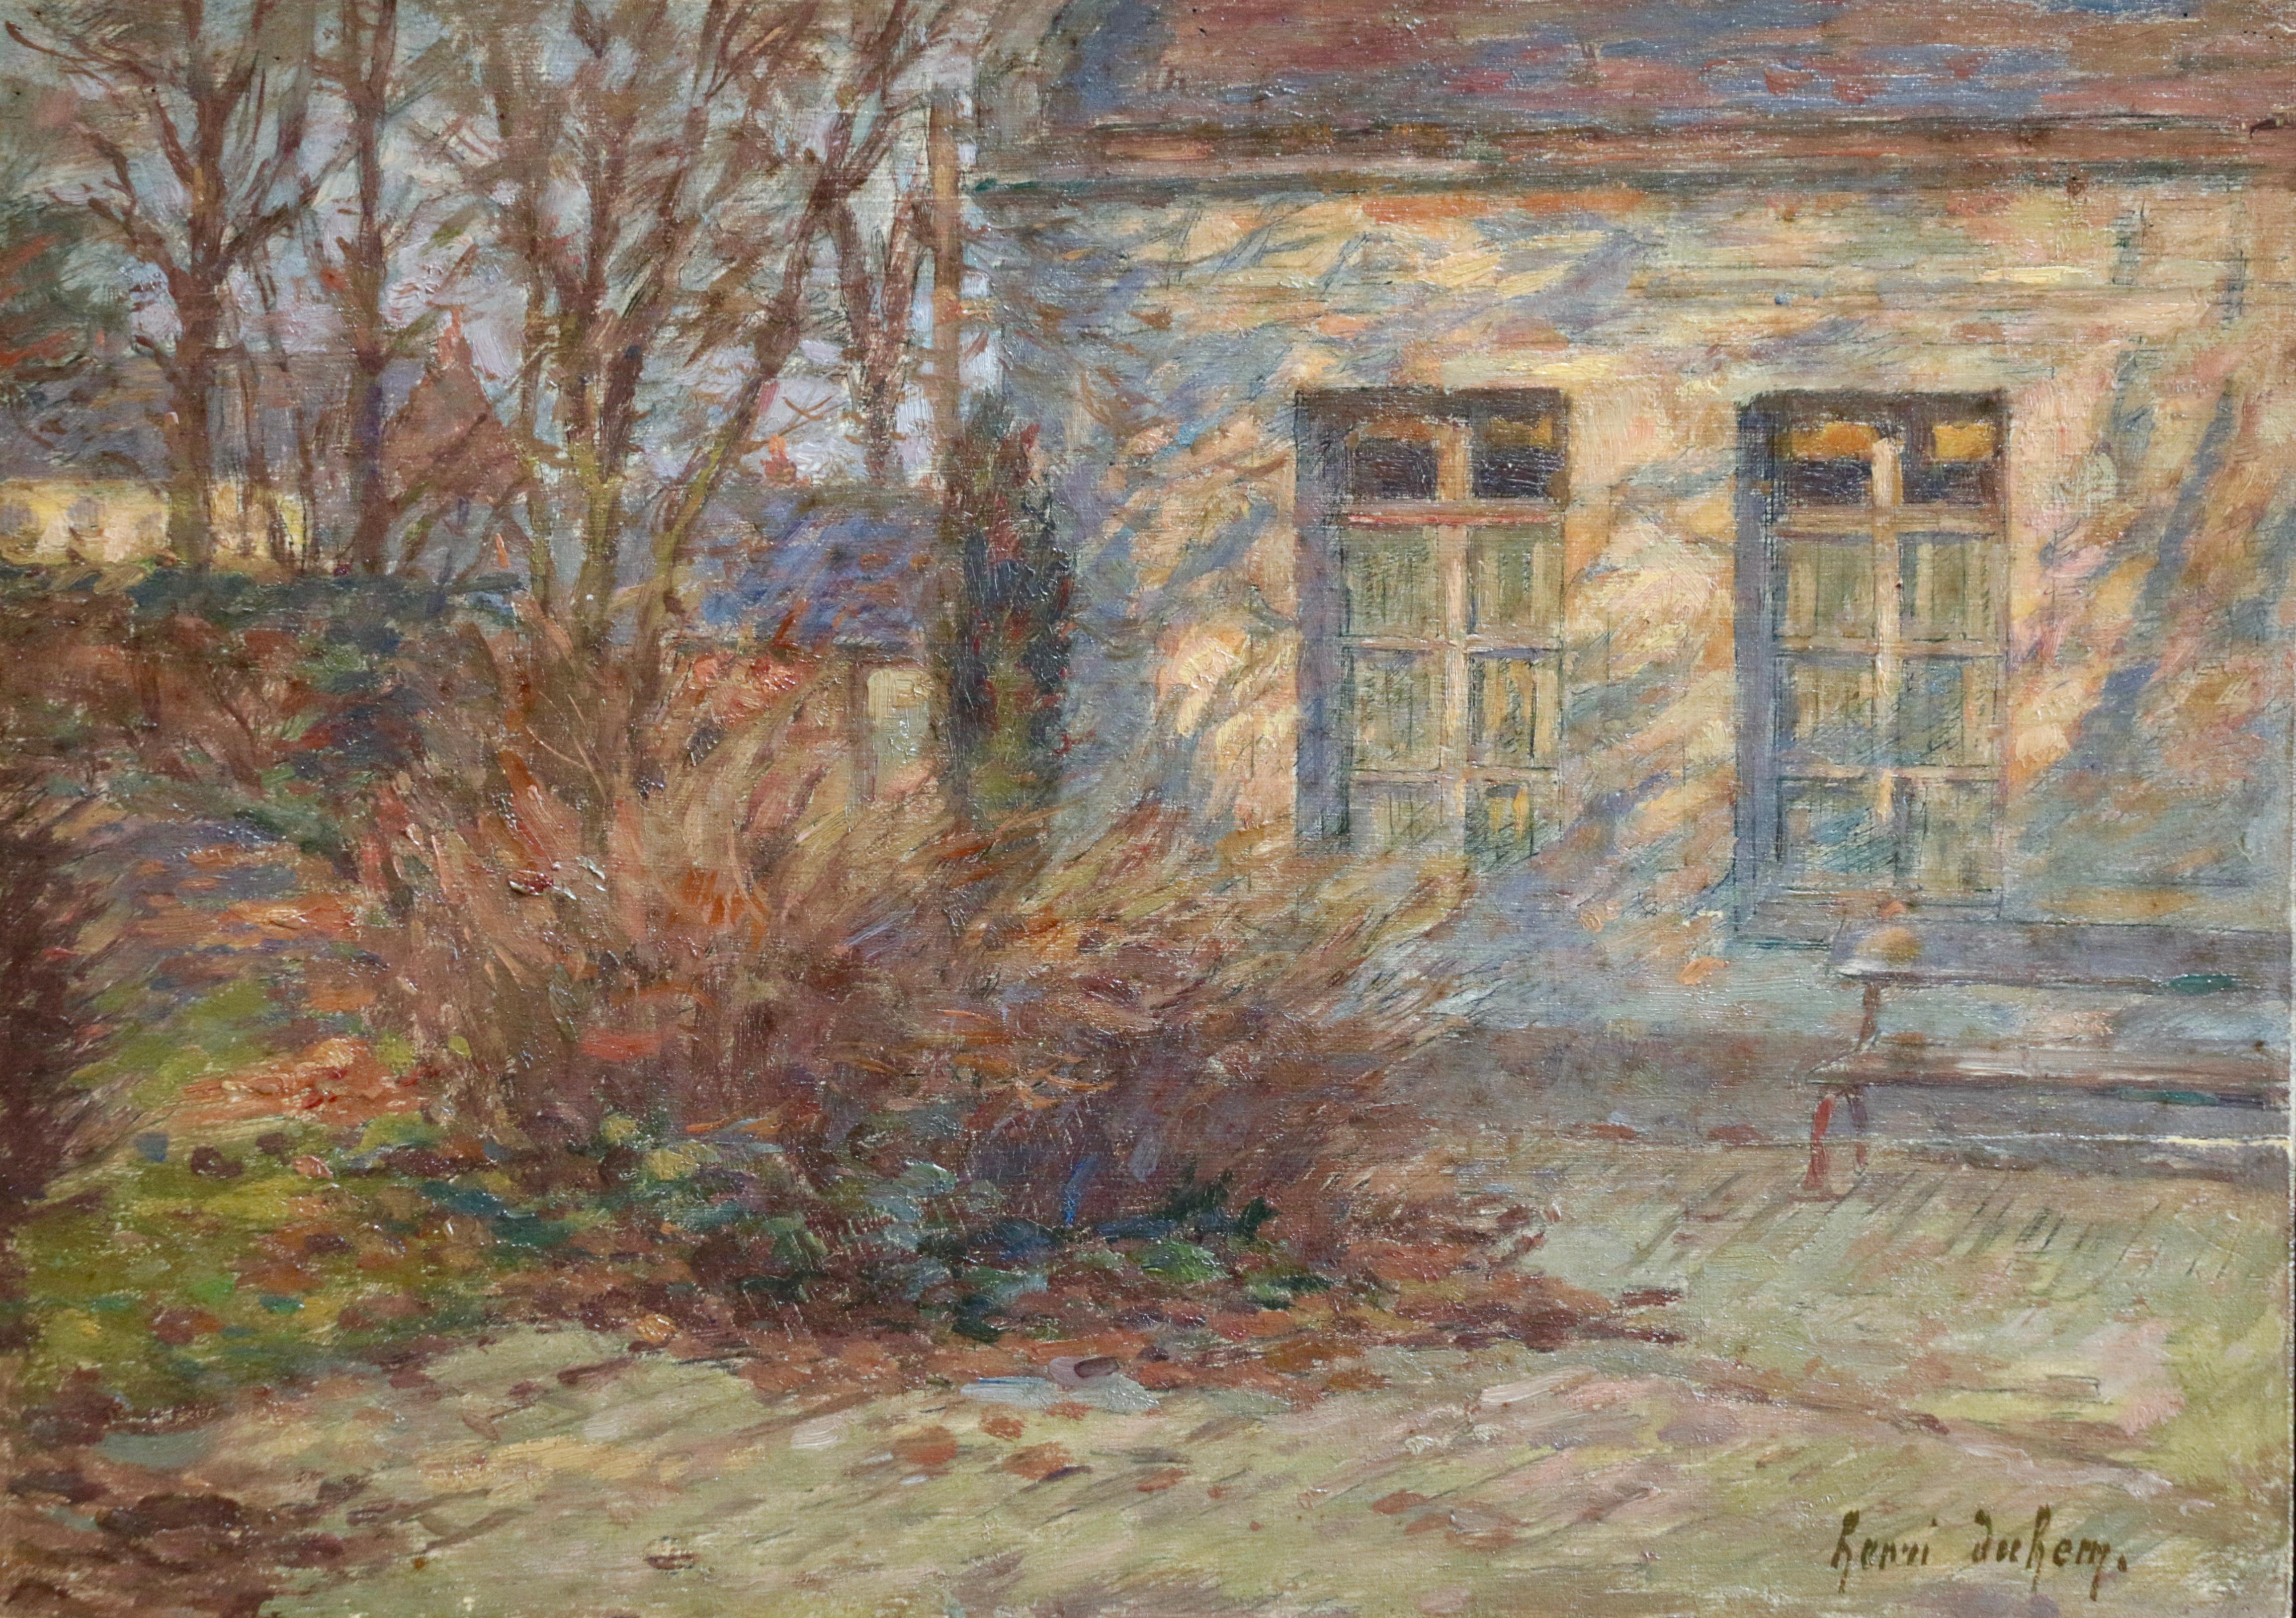 Signed impressionist oil on panel landscape by French painter Henri Duhem. The piece depicts a view of a garden beside a house in autumn. The leaves if the trees are turning shades brown and orange. The sun is setting behind the painter and the